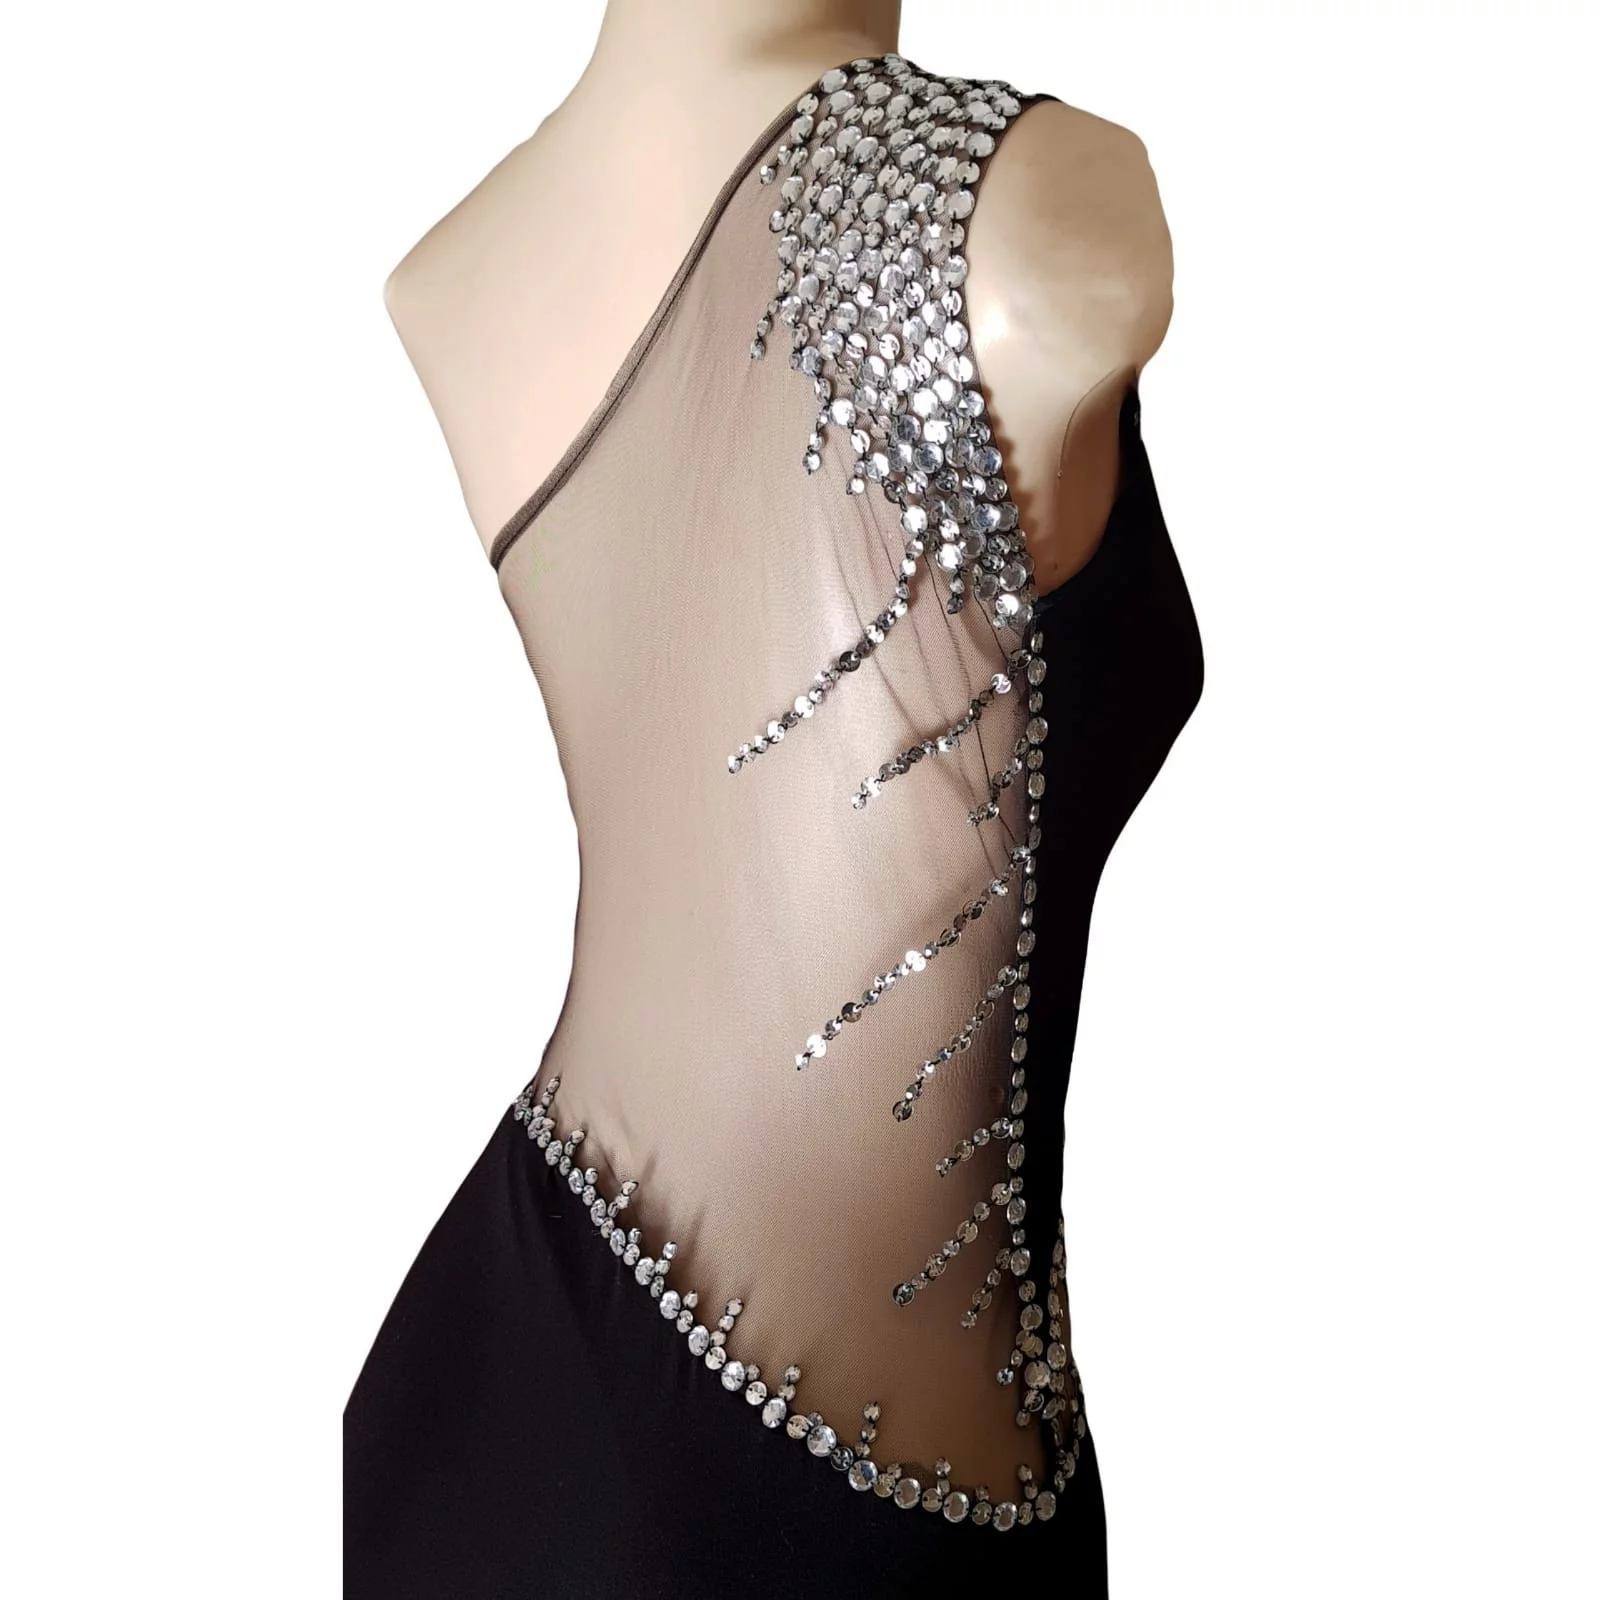 Black and silver long matric dance dress 4 black and silver long matric dance dress with single shoulder design, illusion angled tummy and back detailed with silver beads. With a slit and a train.